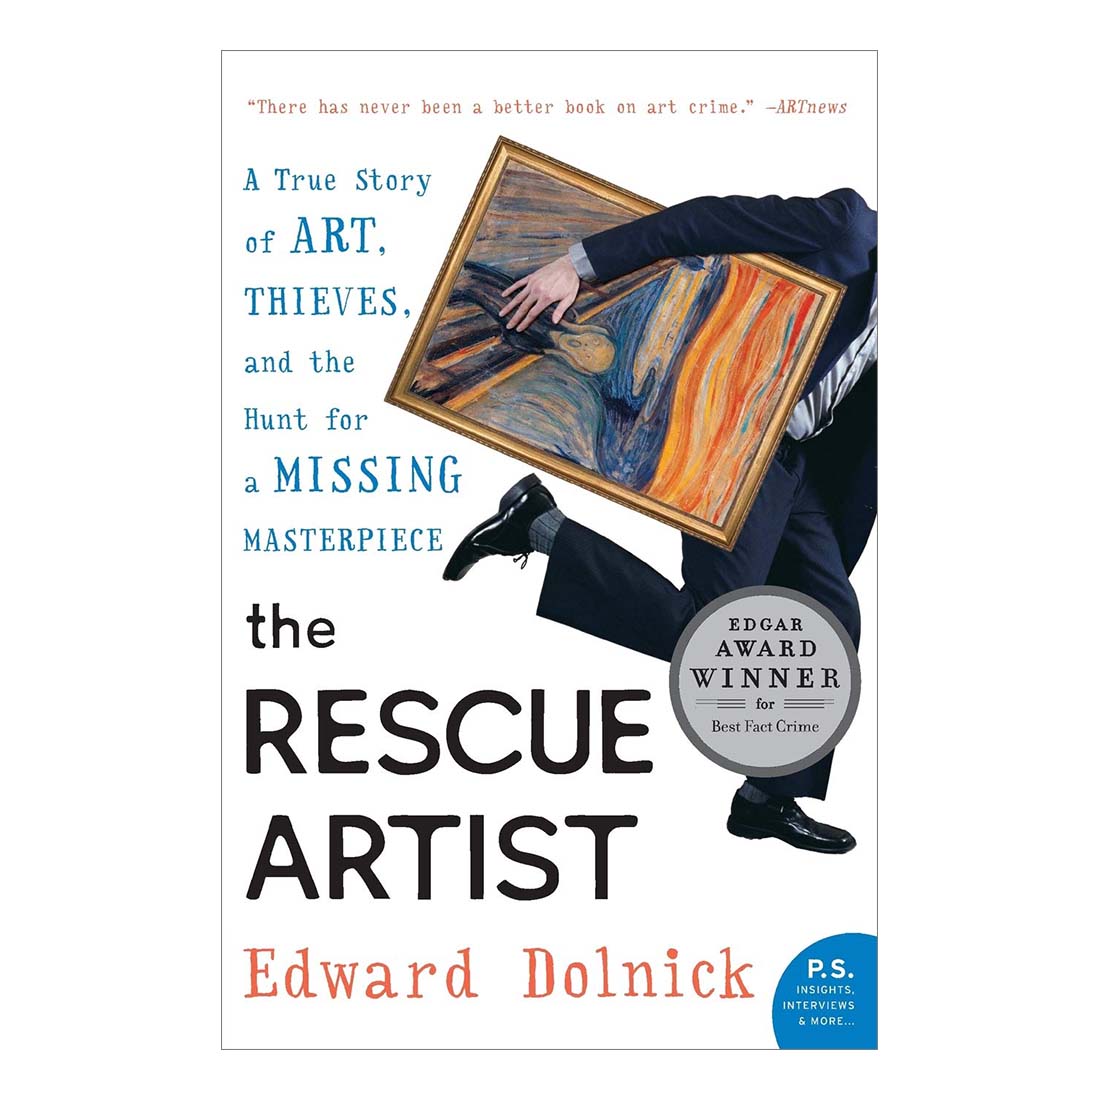 The Rescue Artist: A True Story of Art Thieves, and the Hunt for a Missing Masterpiece